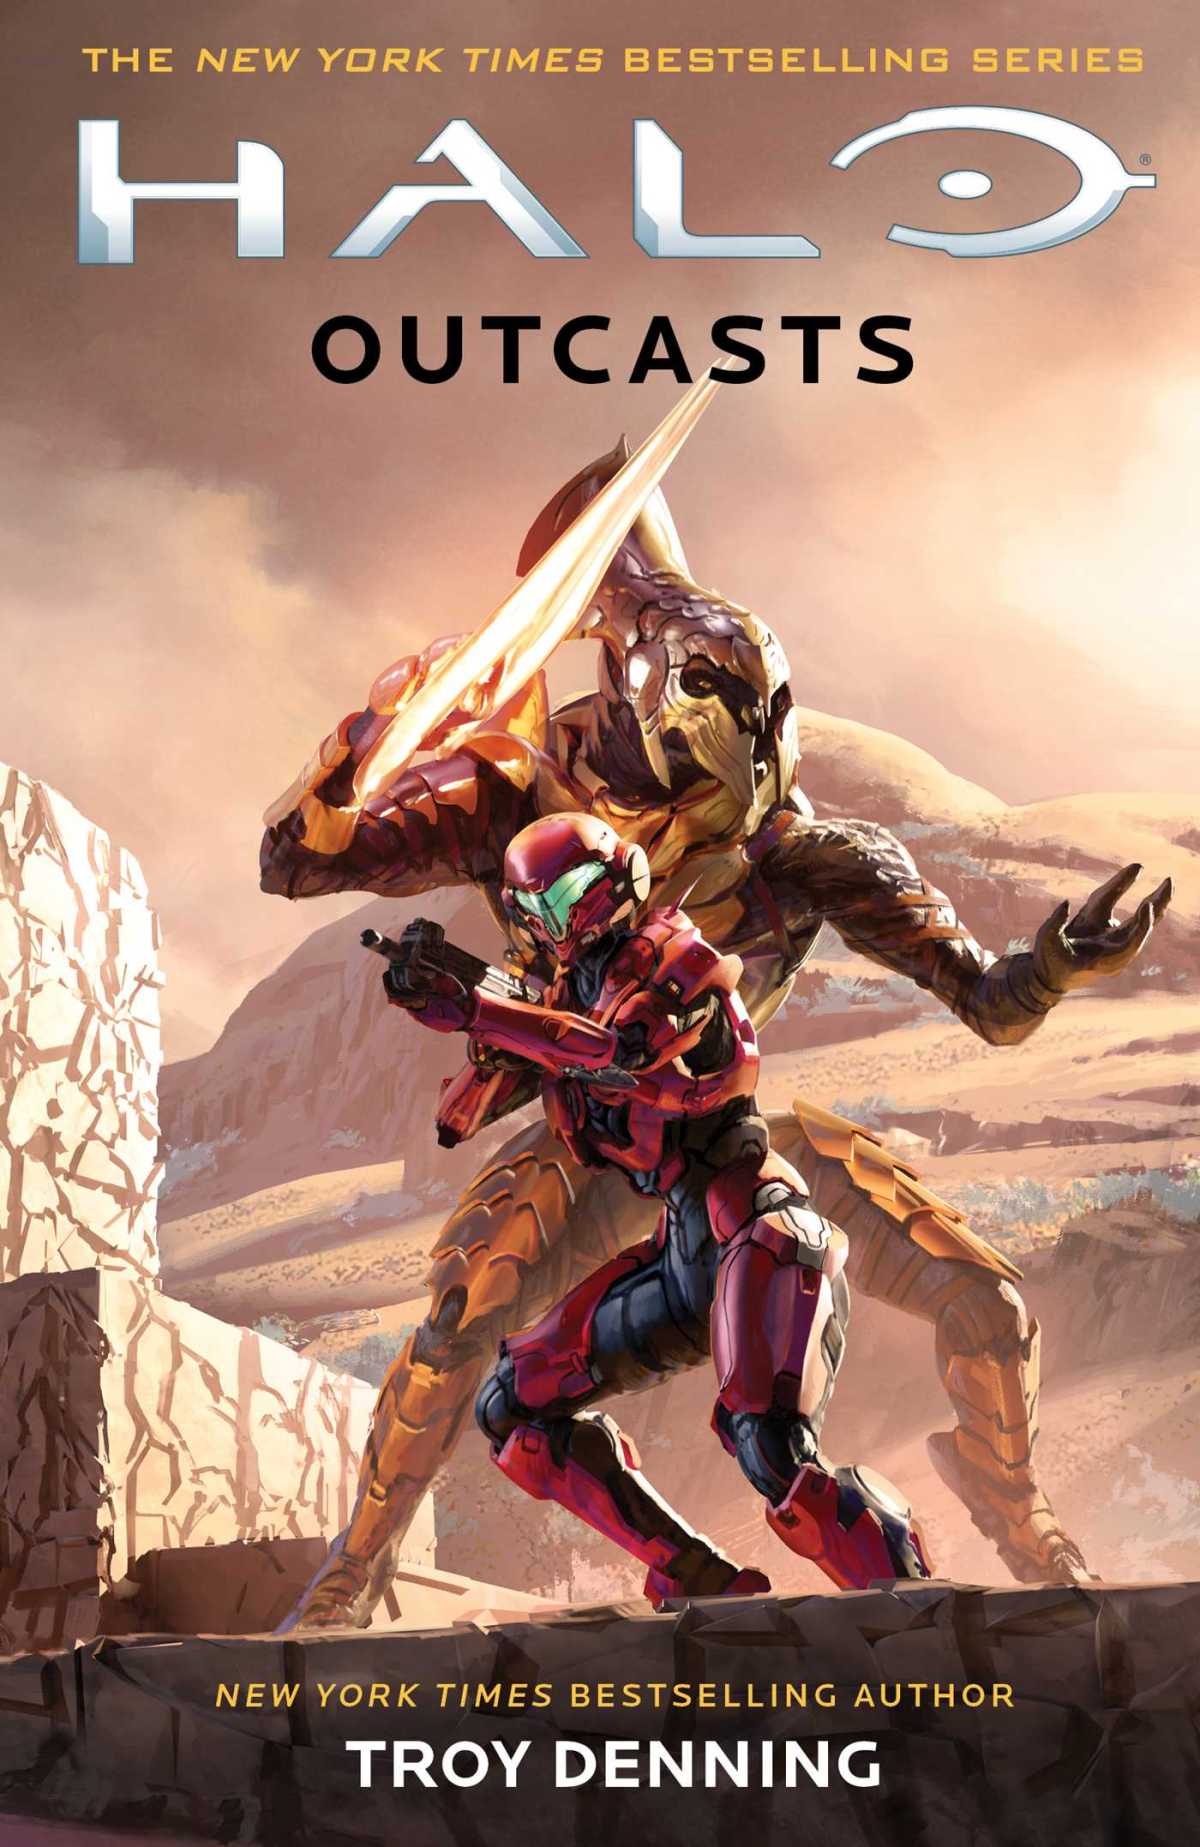 Halo: Outcasts novel author Troy Denning book interview - Arbiter Thel Vadam & Olympia Vale